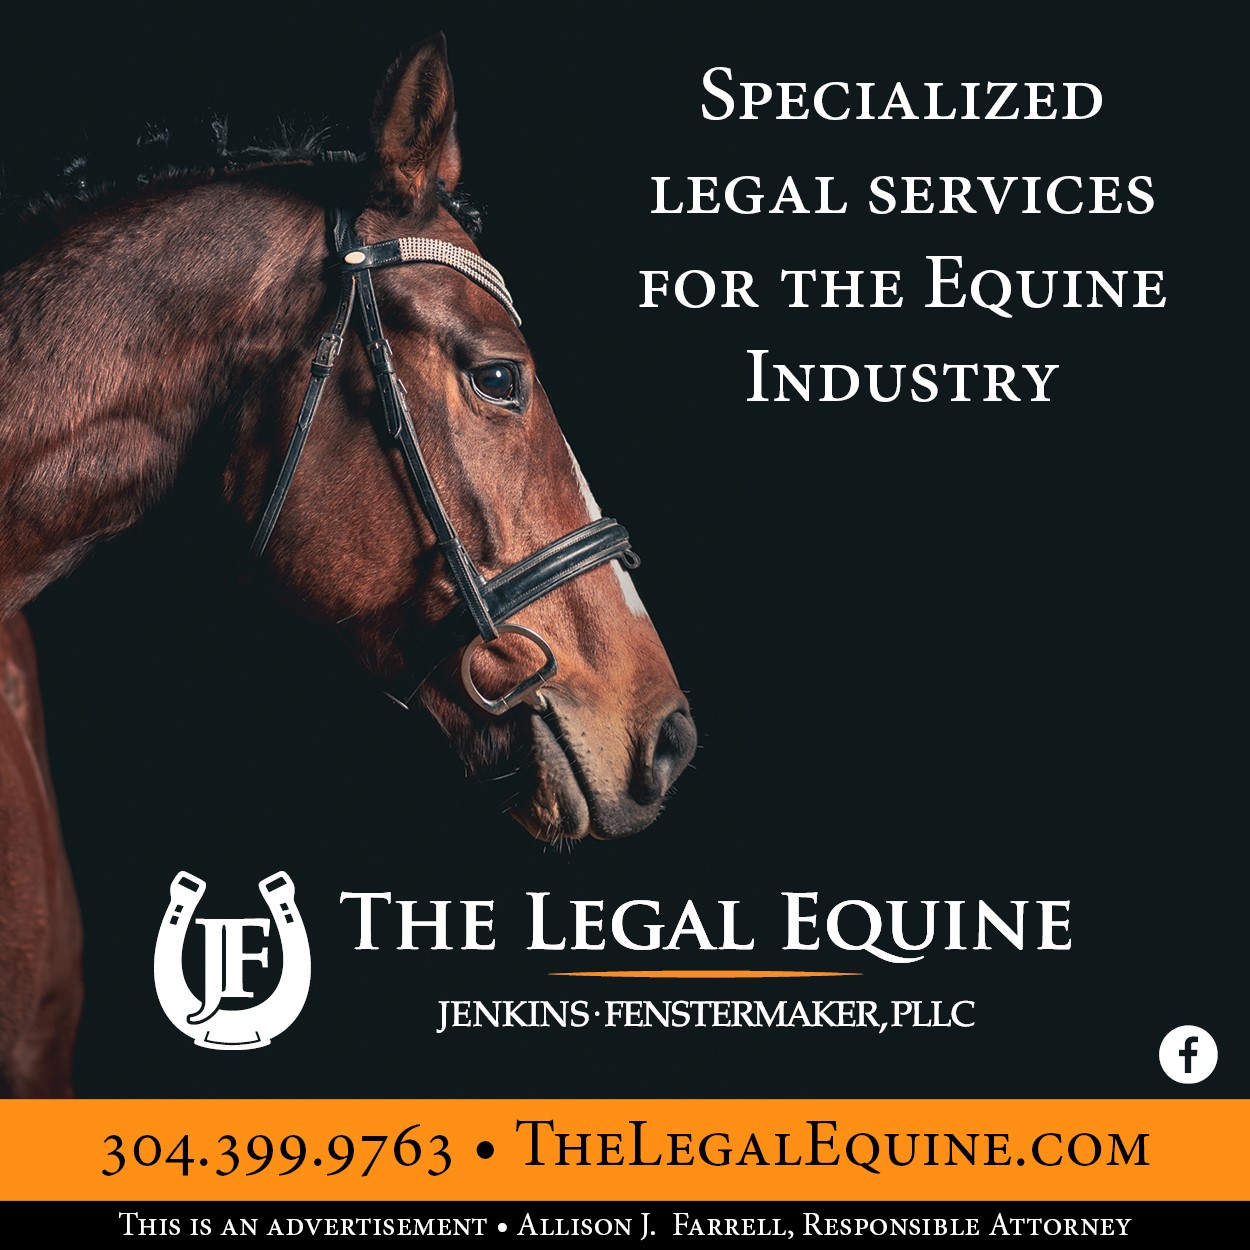 The Legal Equine